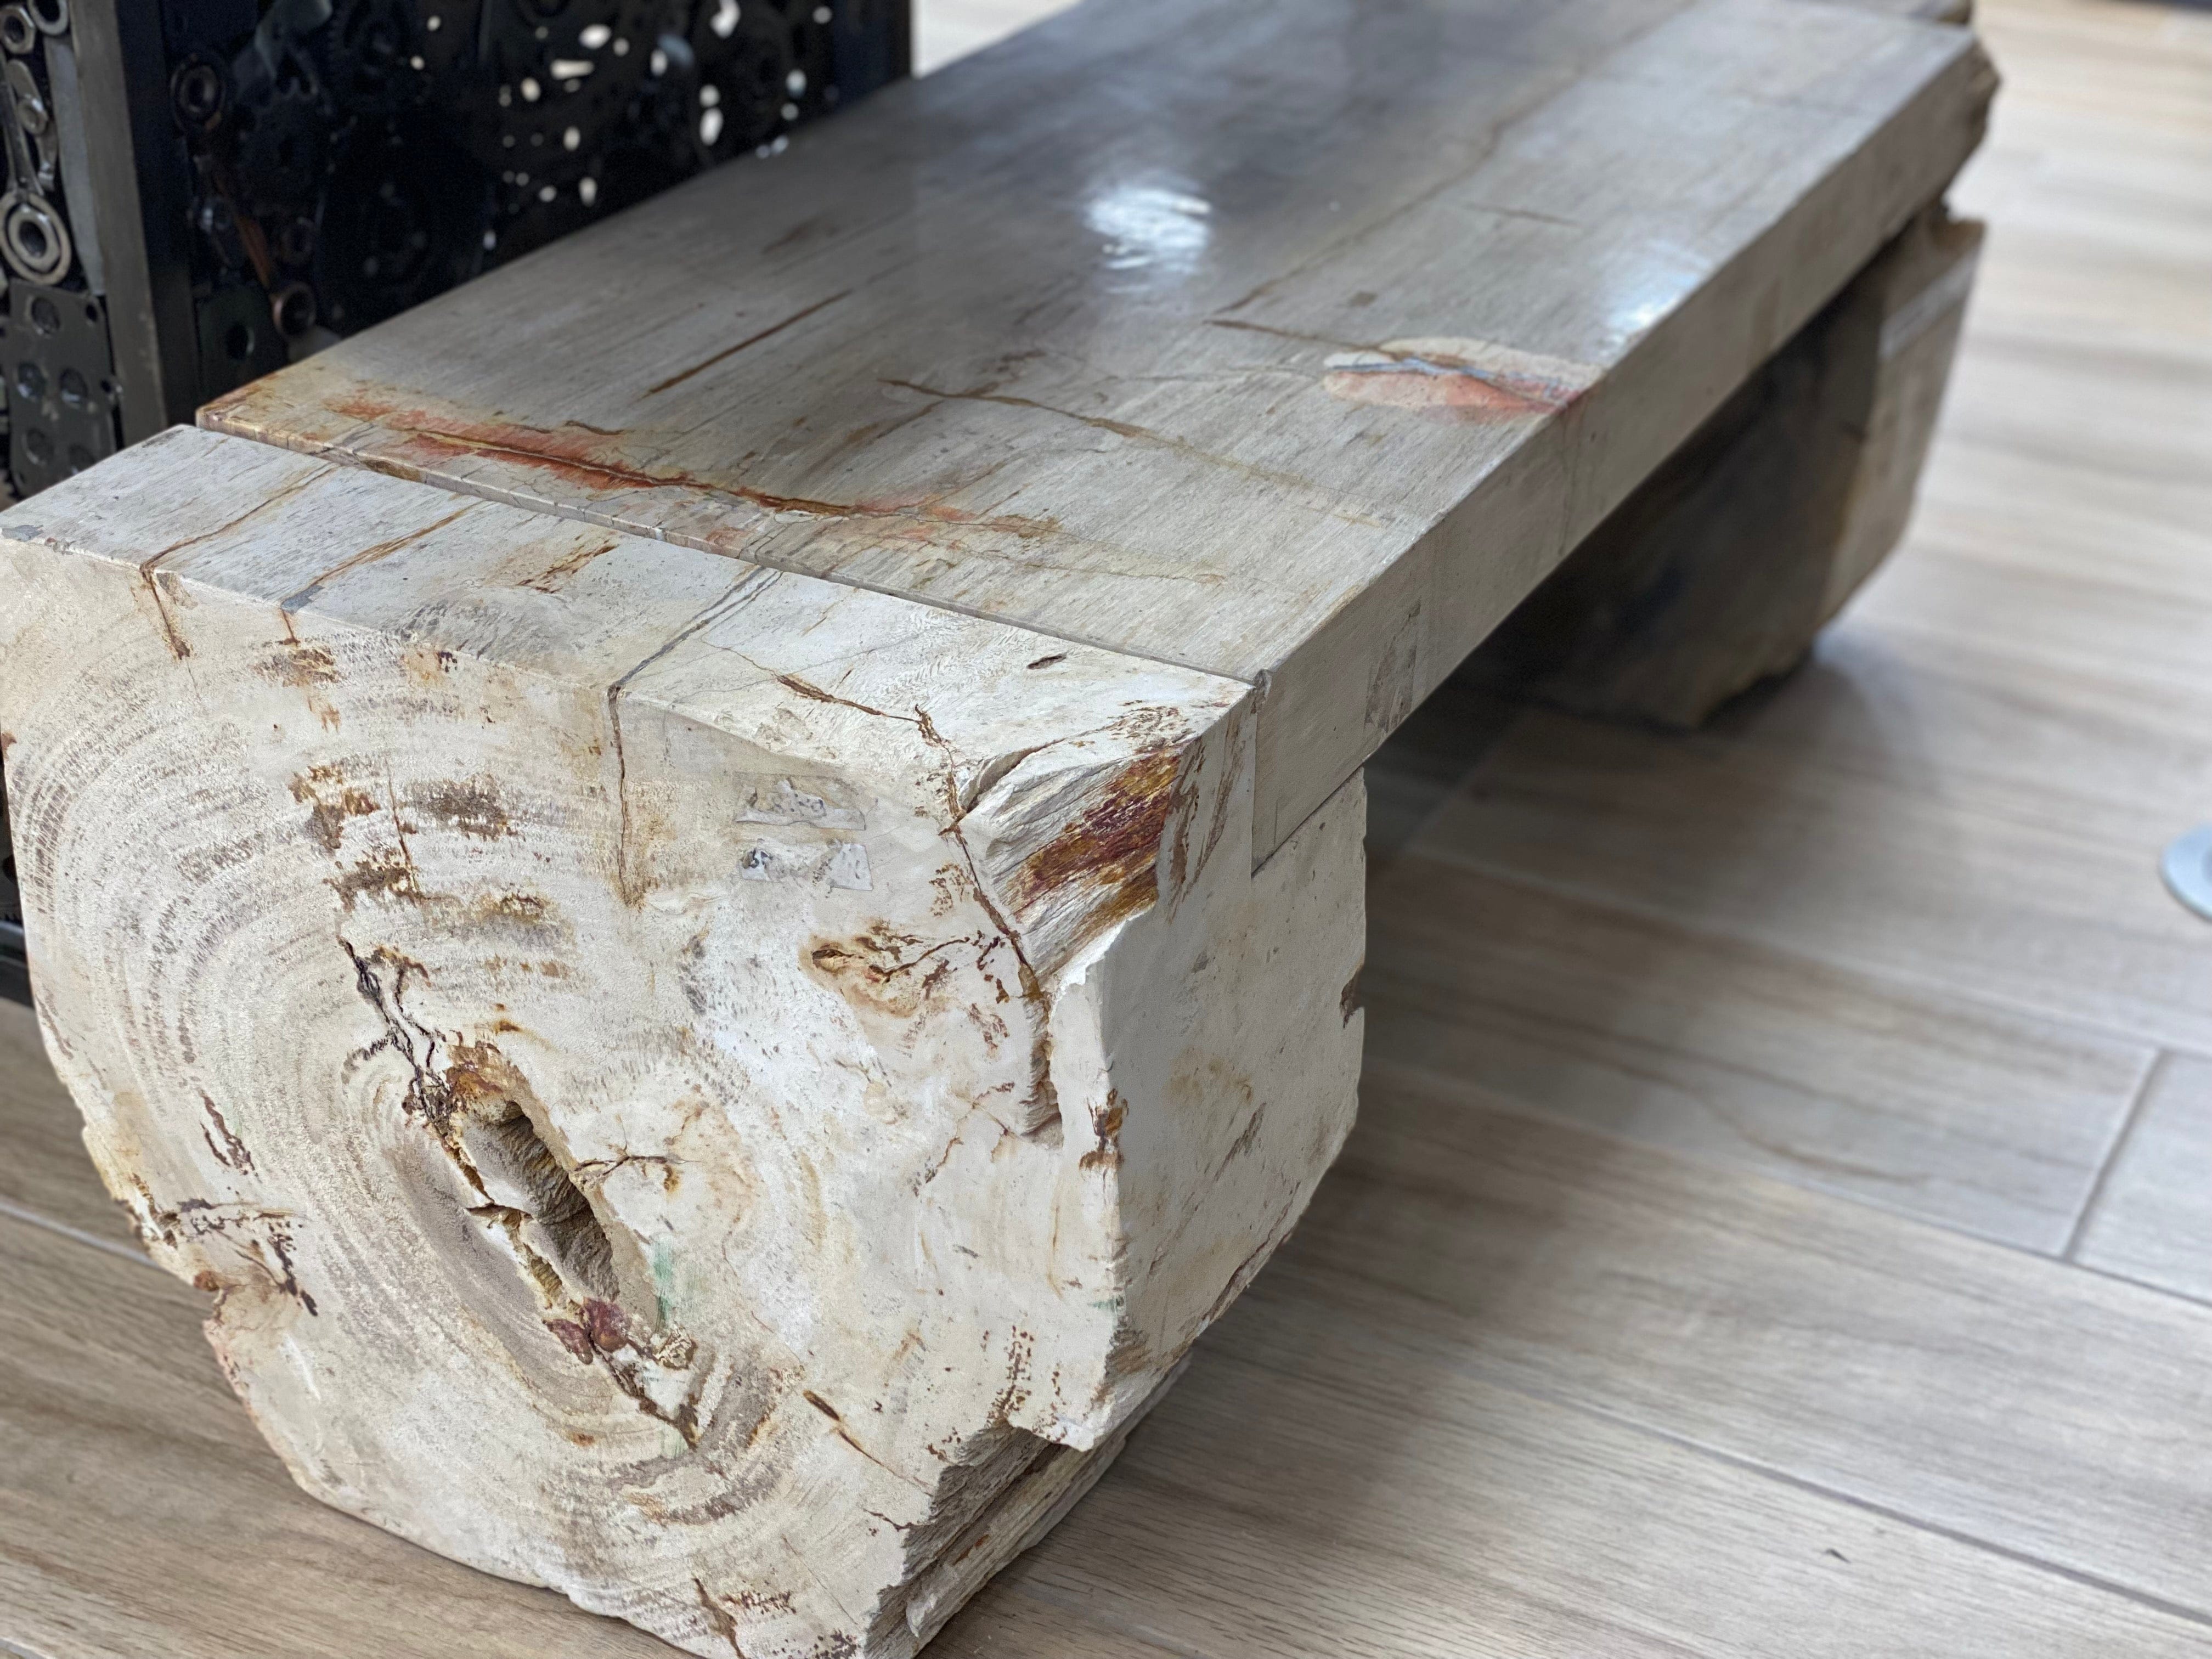 Kalifano Petrified Wood Natural Polished Petrified Wood Bench from Indonesia - 18" / 580 lbs PWT31600.001